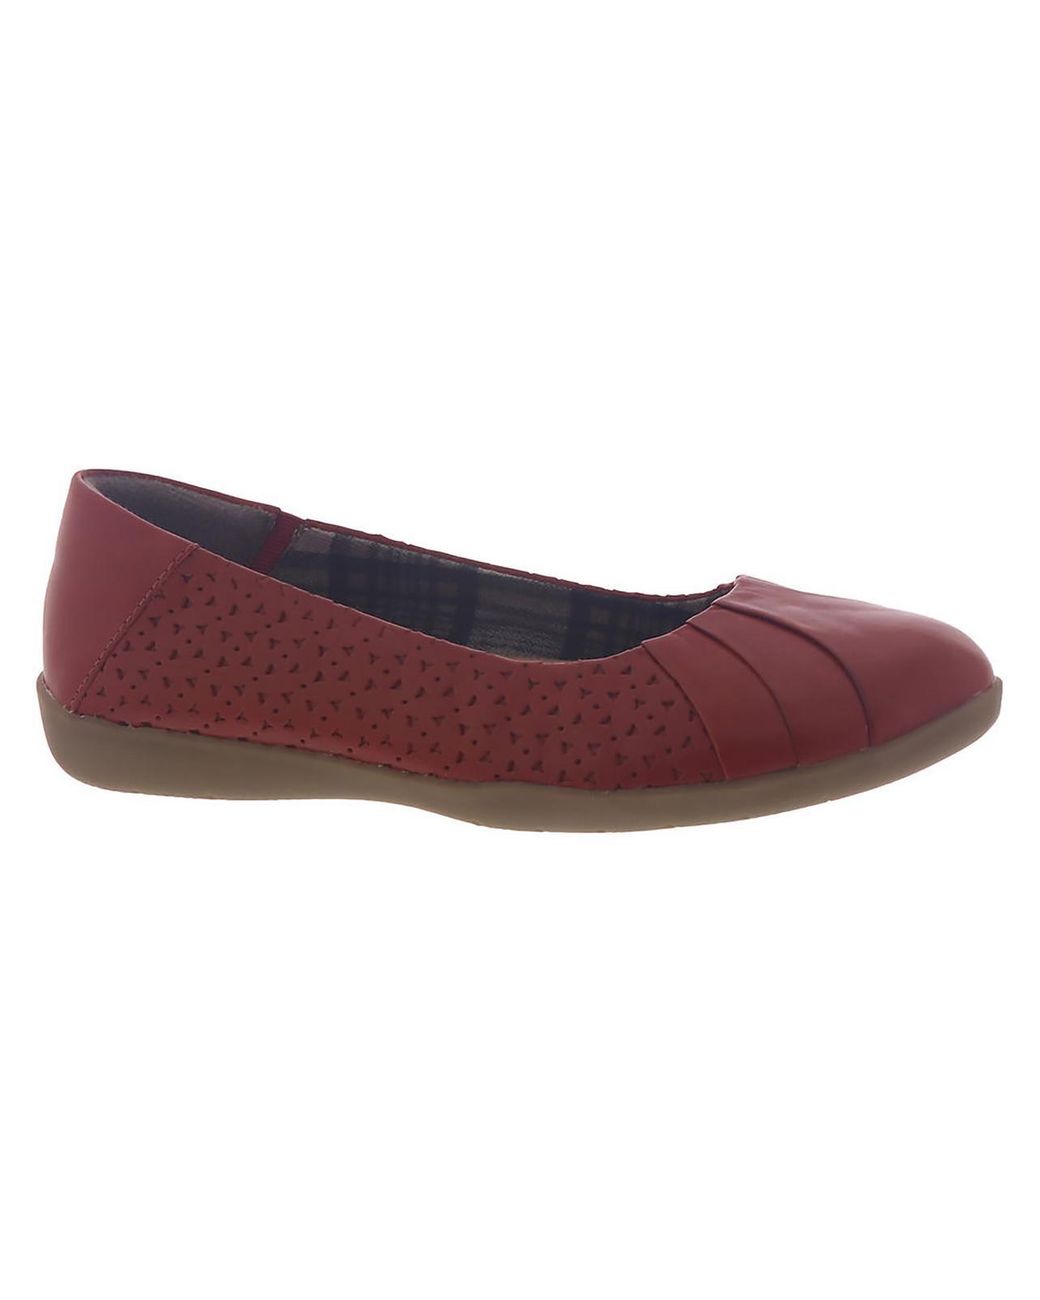 Earth Origins Fiona Leather Slip On Flats in Red